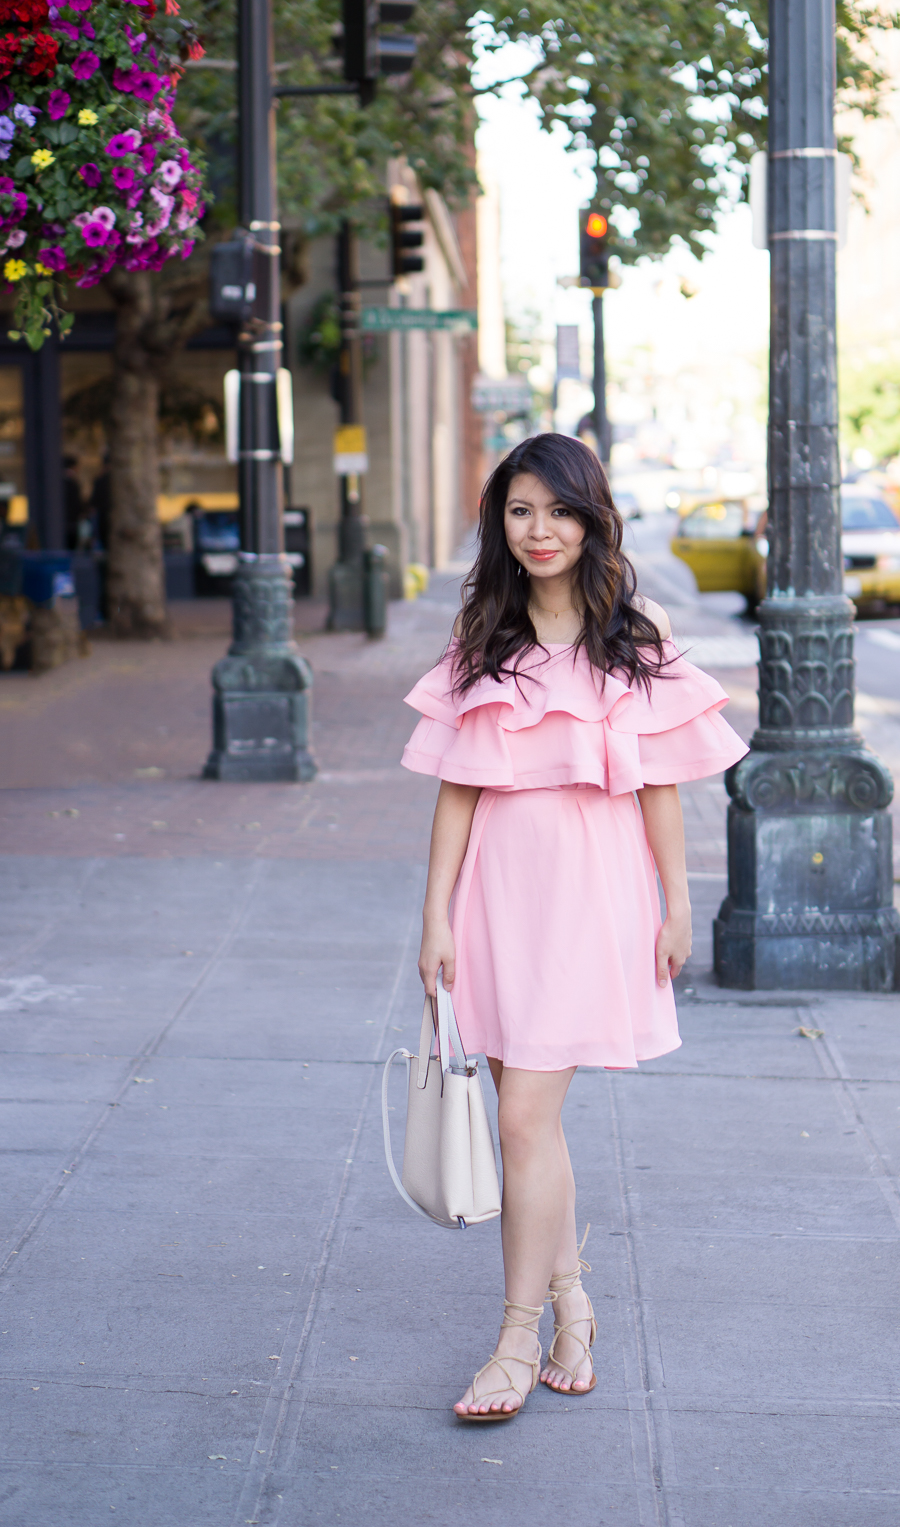 pink ruffle dress, off the shoulder dress outfit, gladiator sandals, spring fashion